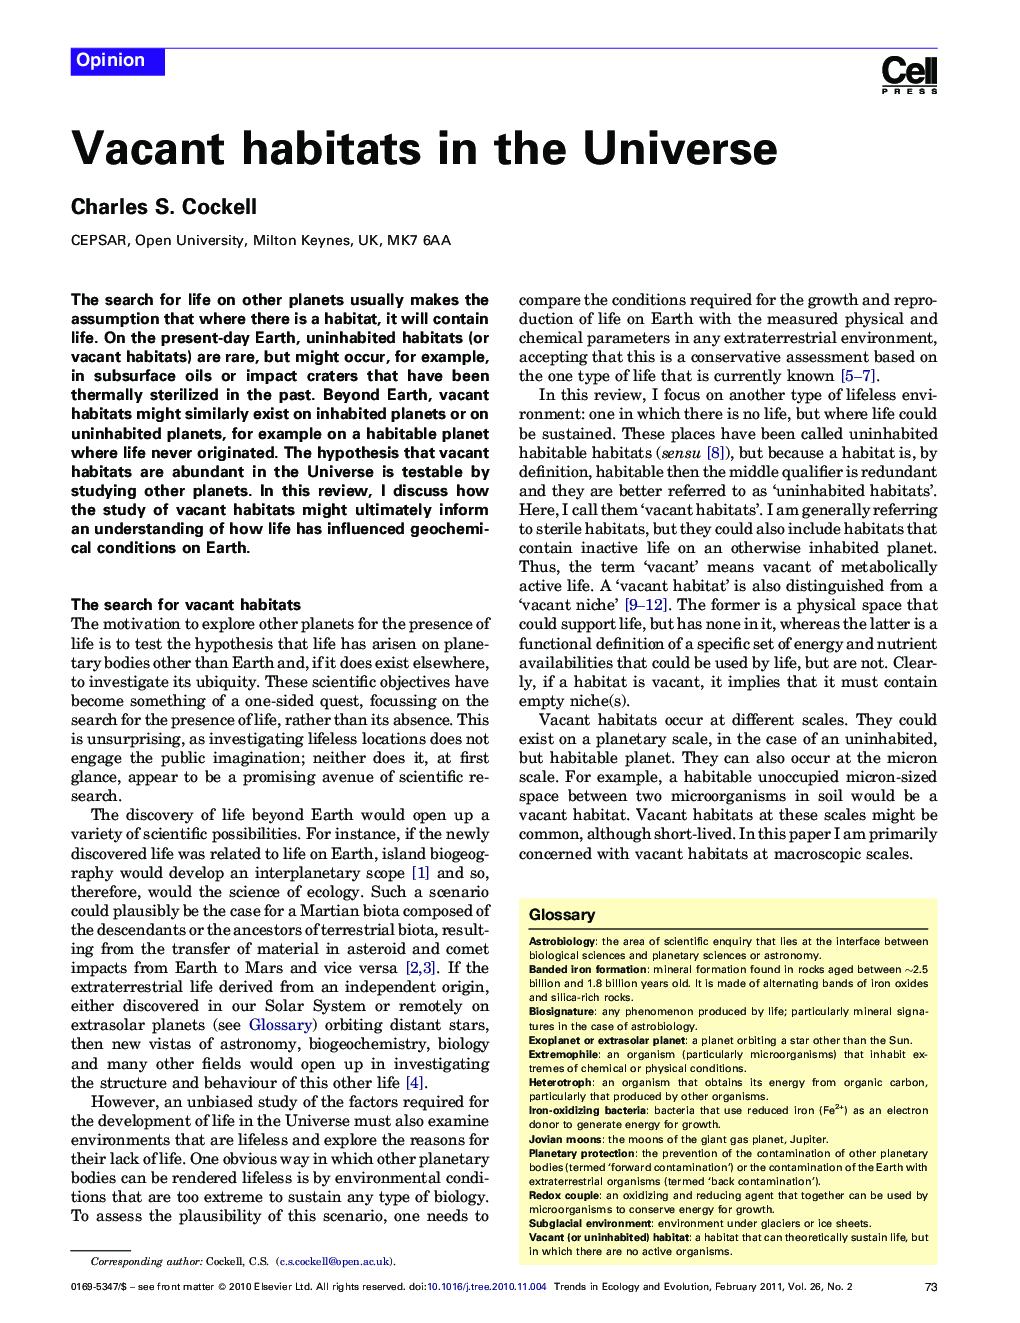 Vacant habitats in the Universe